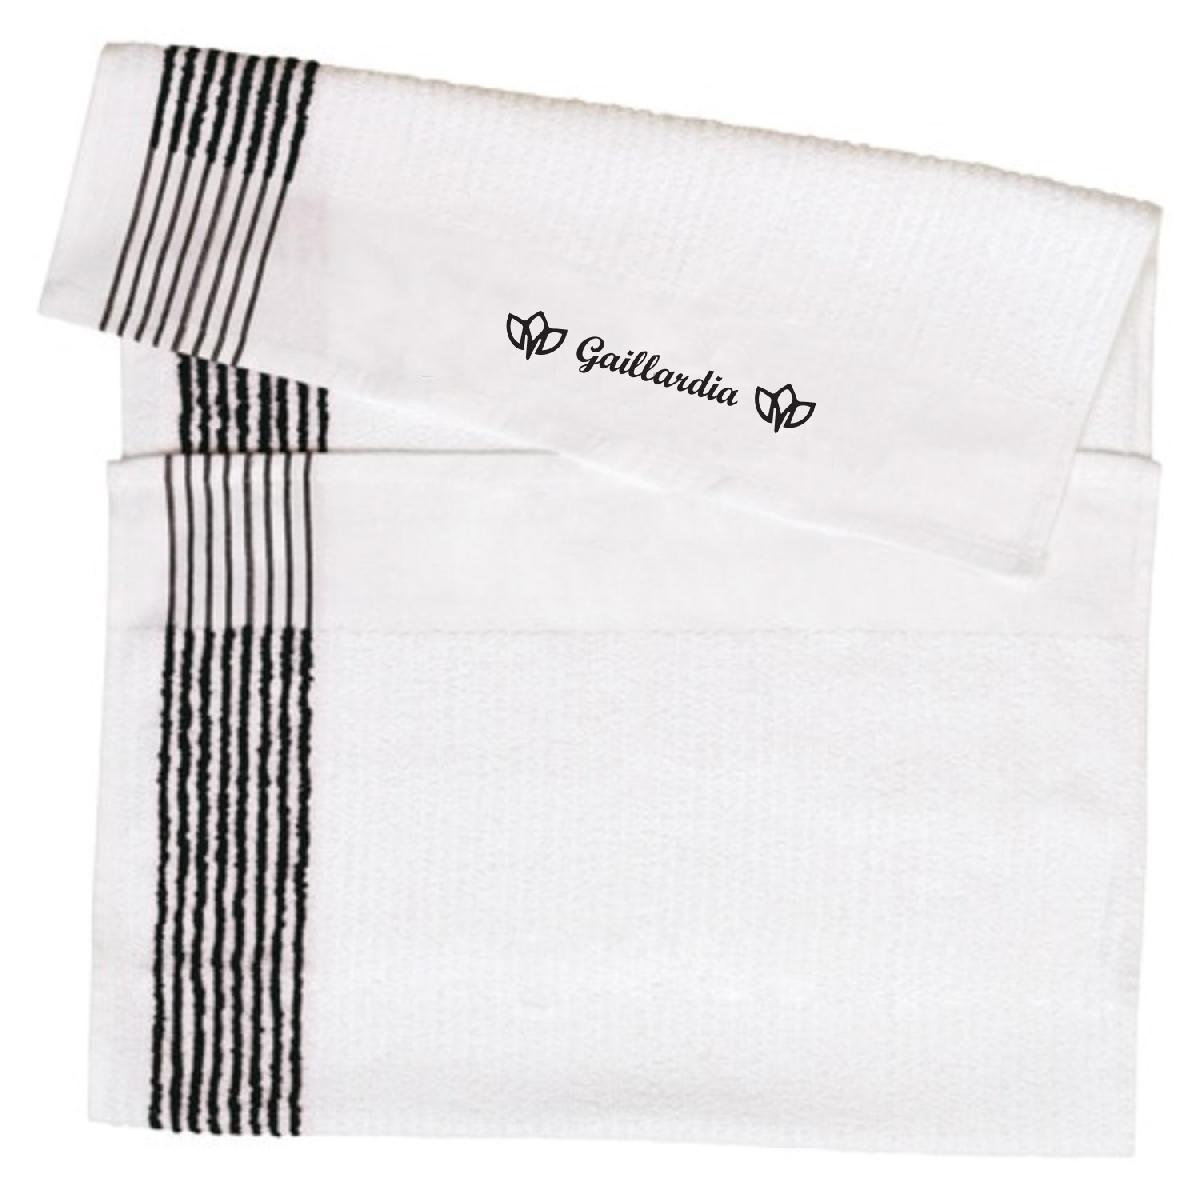 Tour Caddy Golf Towel - White with Color Stripe - Embroidery